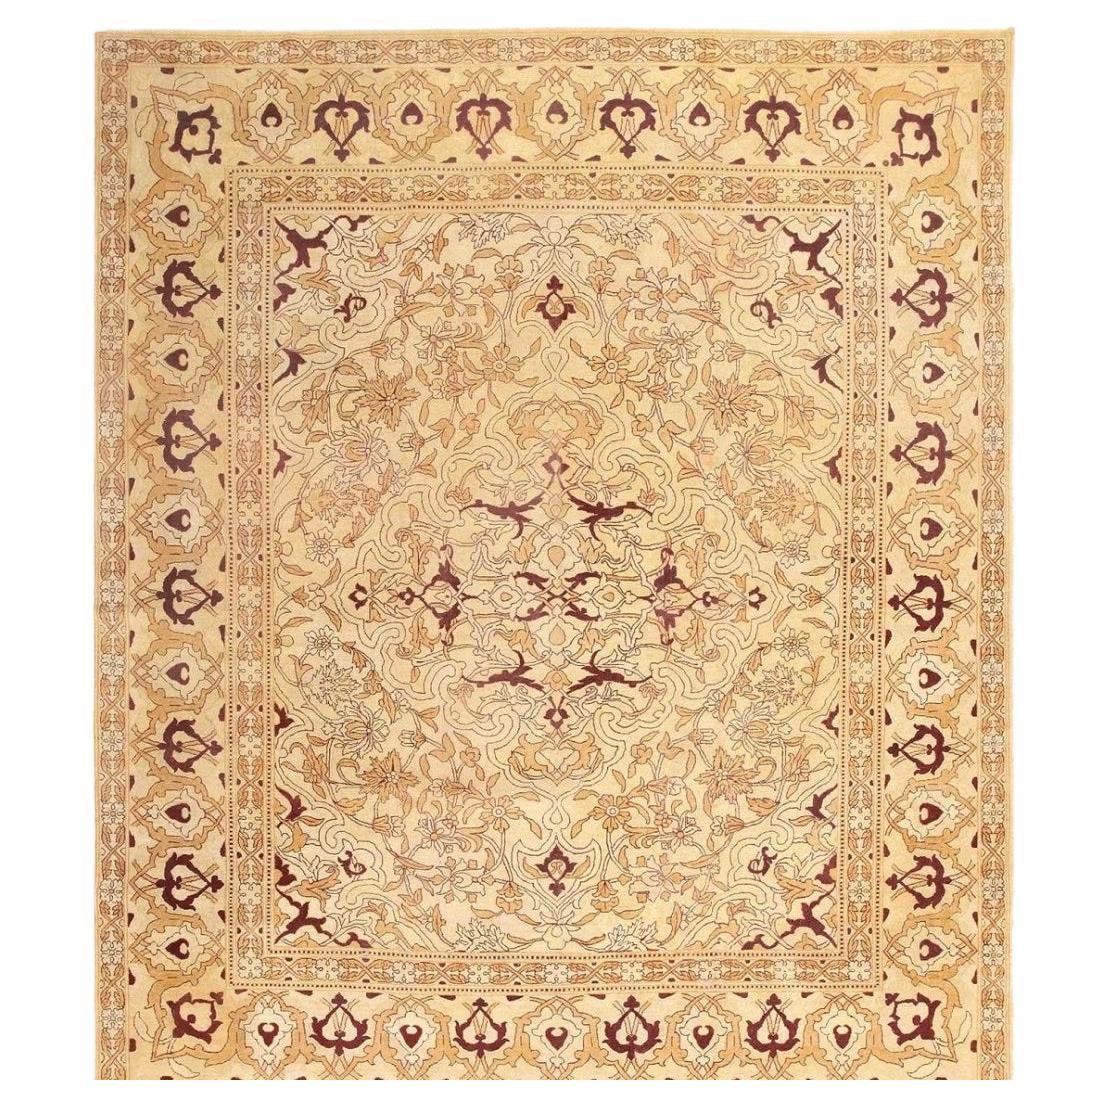 ANTIQUE INDIAN AMRITSAR RUG, 11 ft 6 in x 9 ft 7 in For Sale